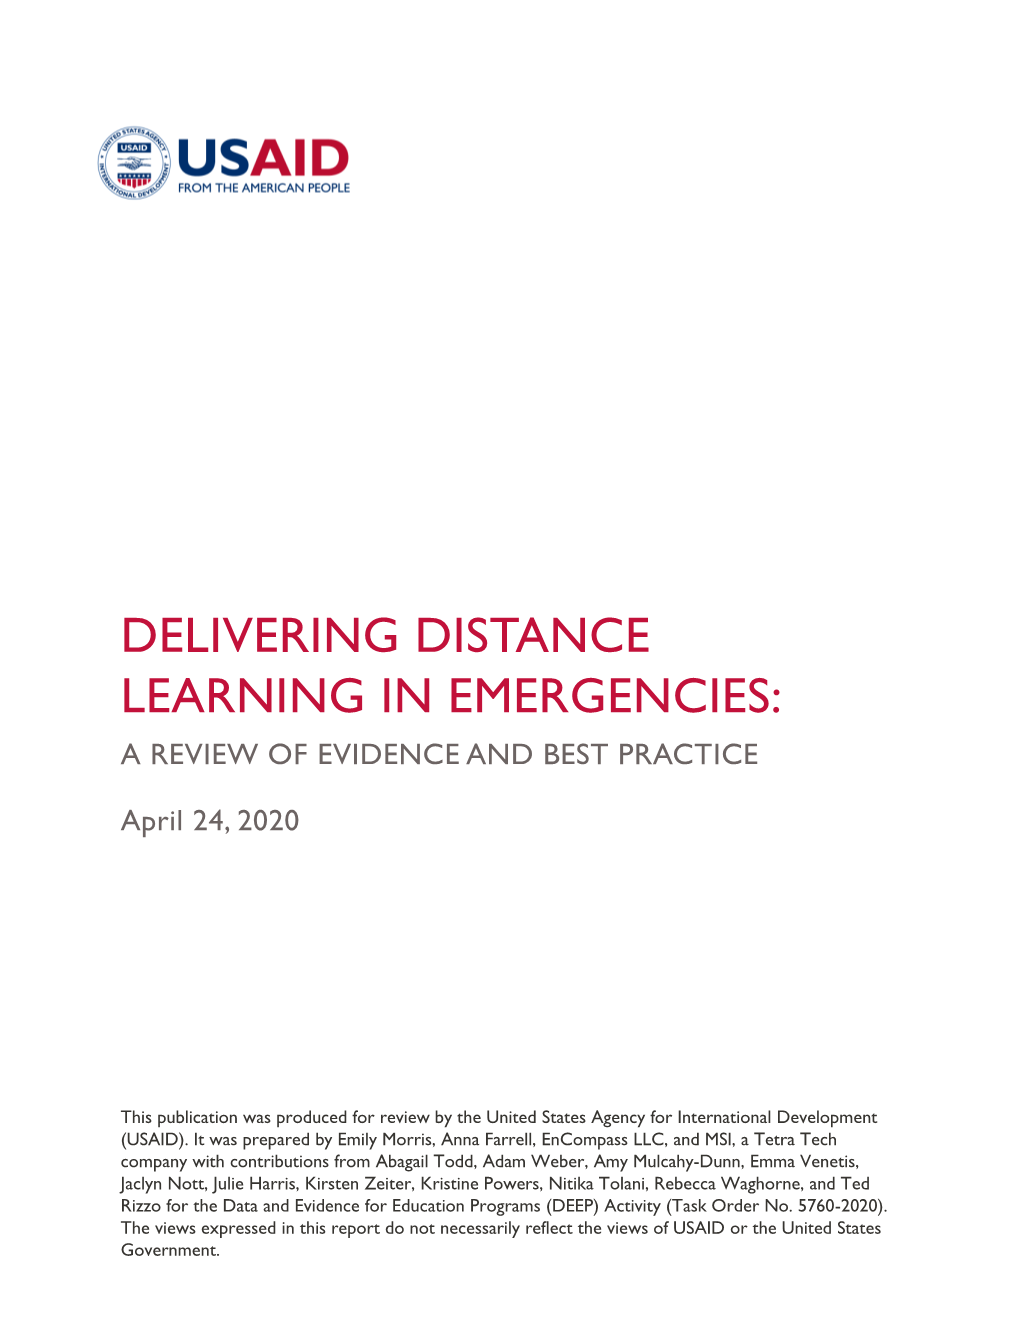 Delivering Distance Learning in Emergencies: a Review of Evidence and Best Practice